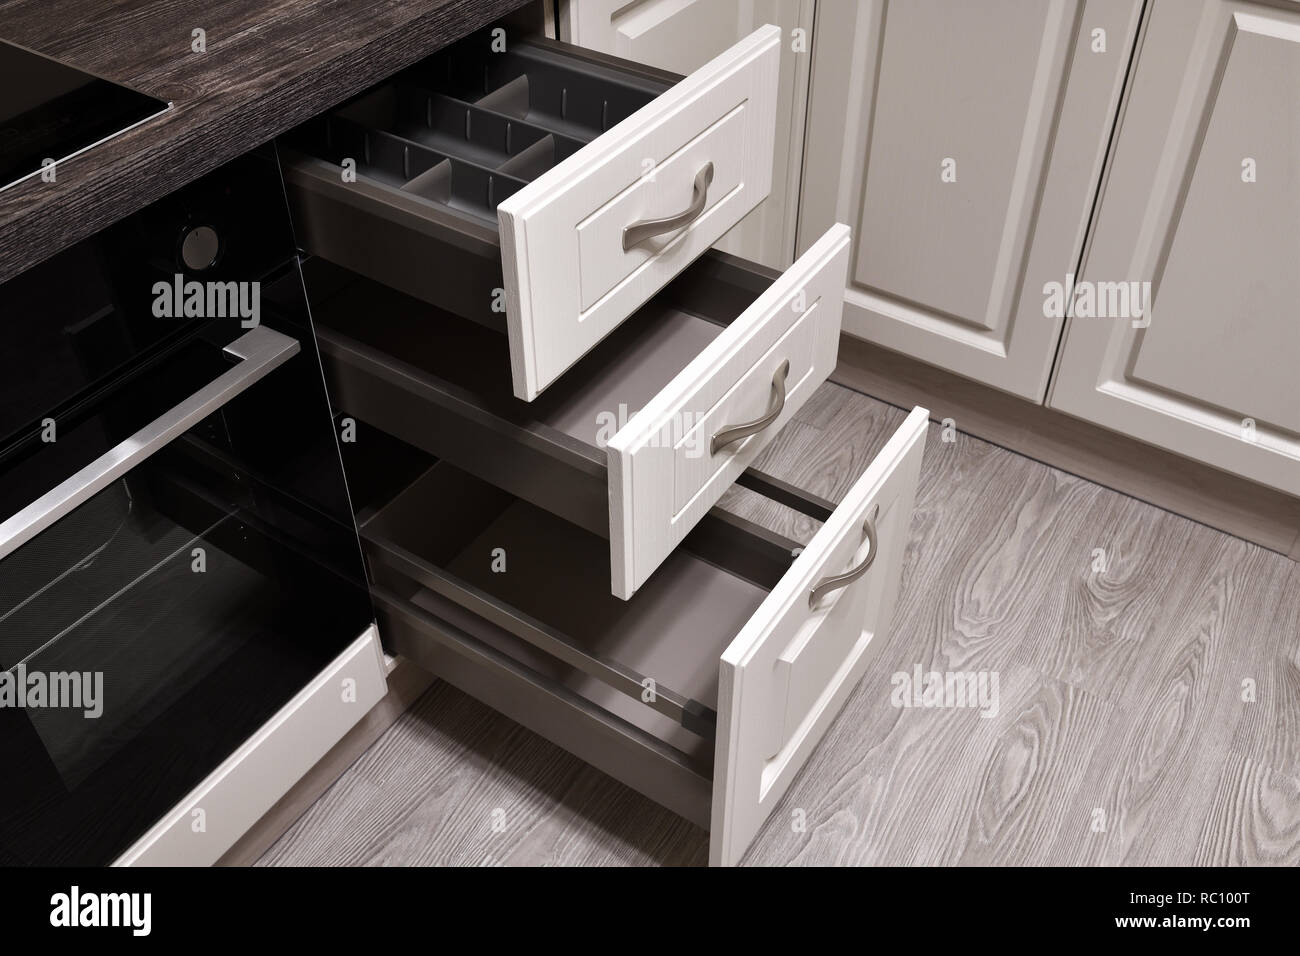 An open drawers in the kitchen table Stock Photo